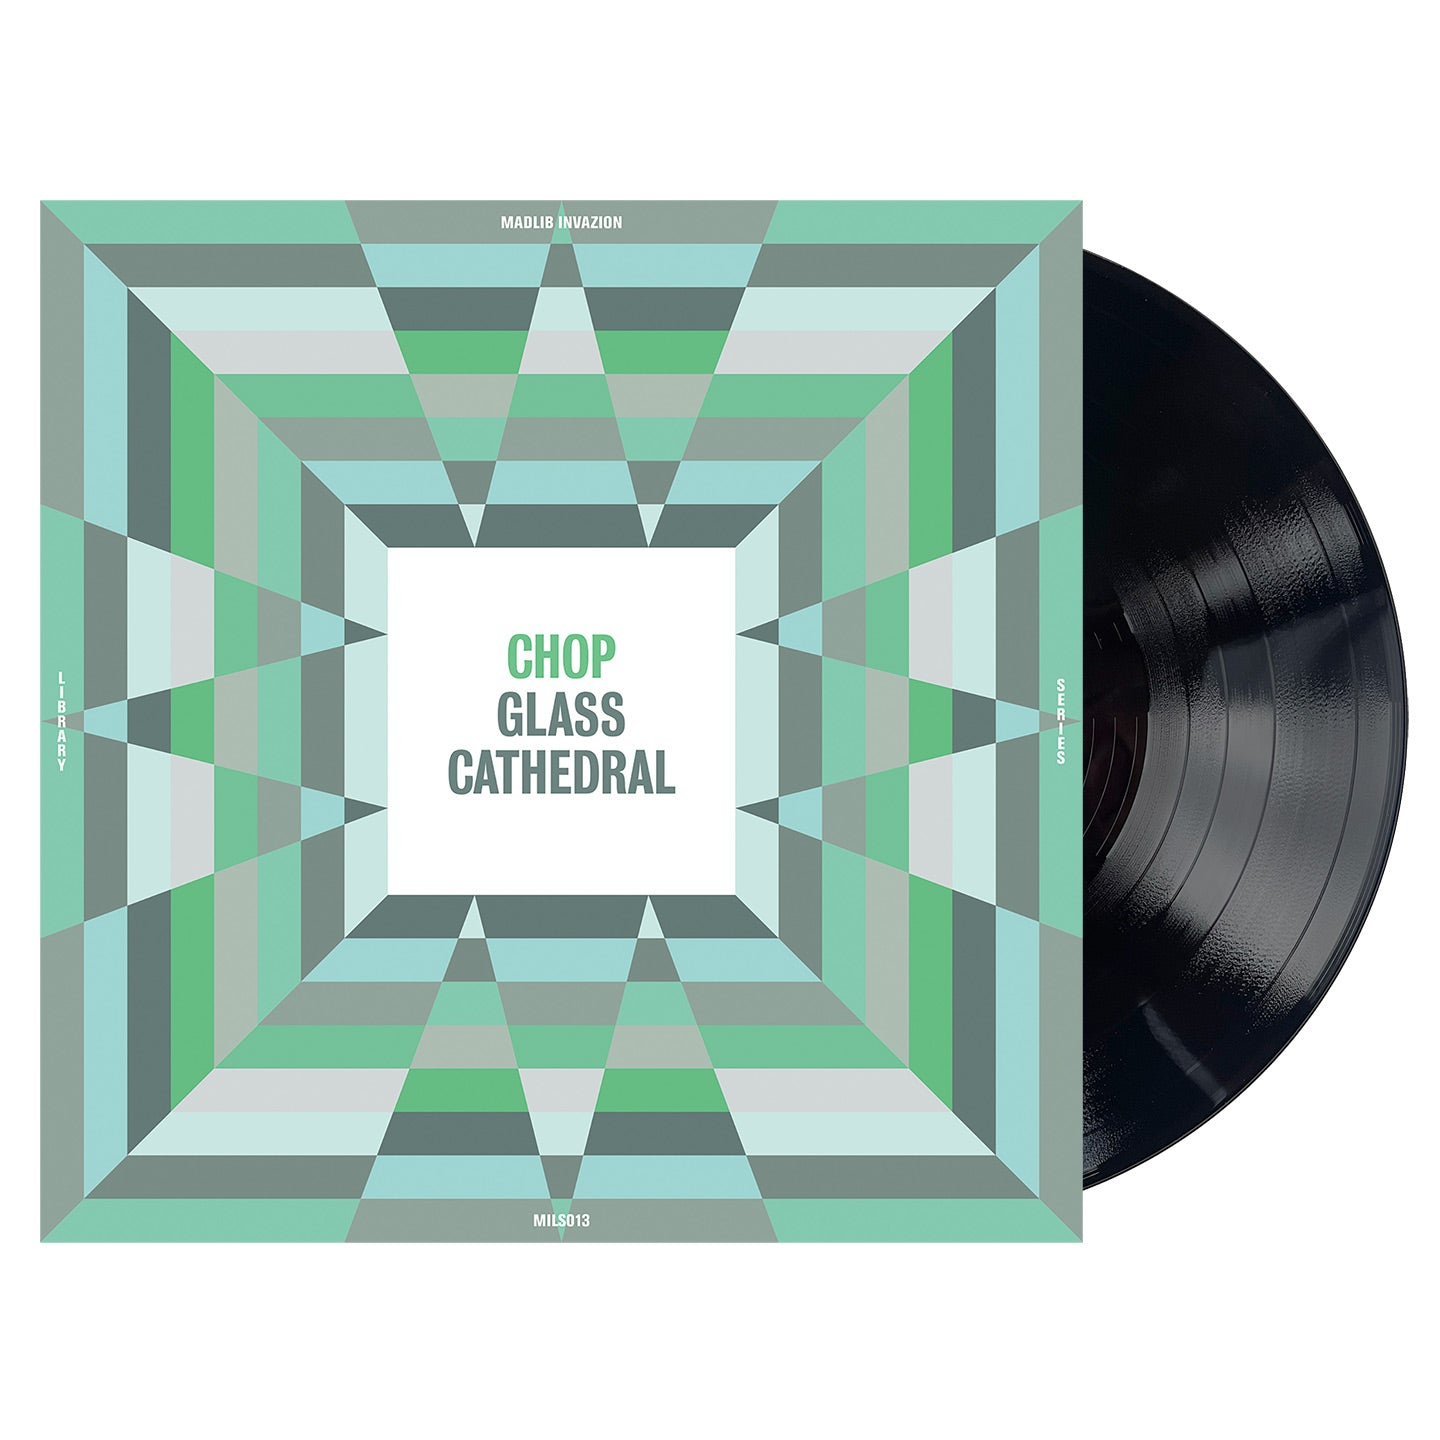 Chop - Glass Cathedral (Madlib Invazion Music Library Series #13)